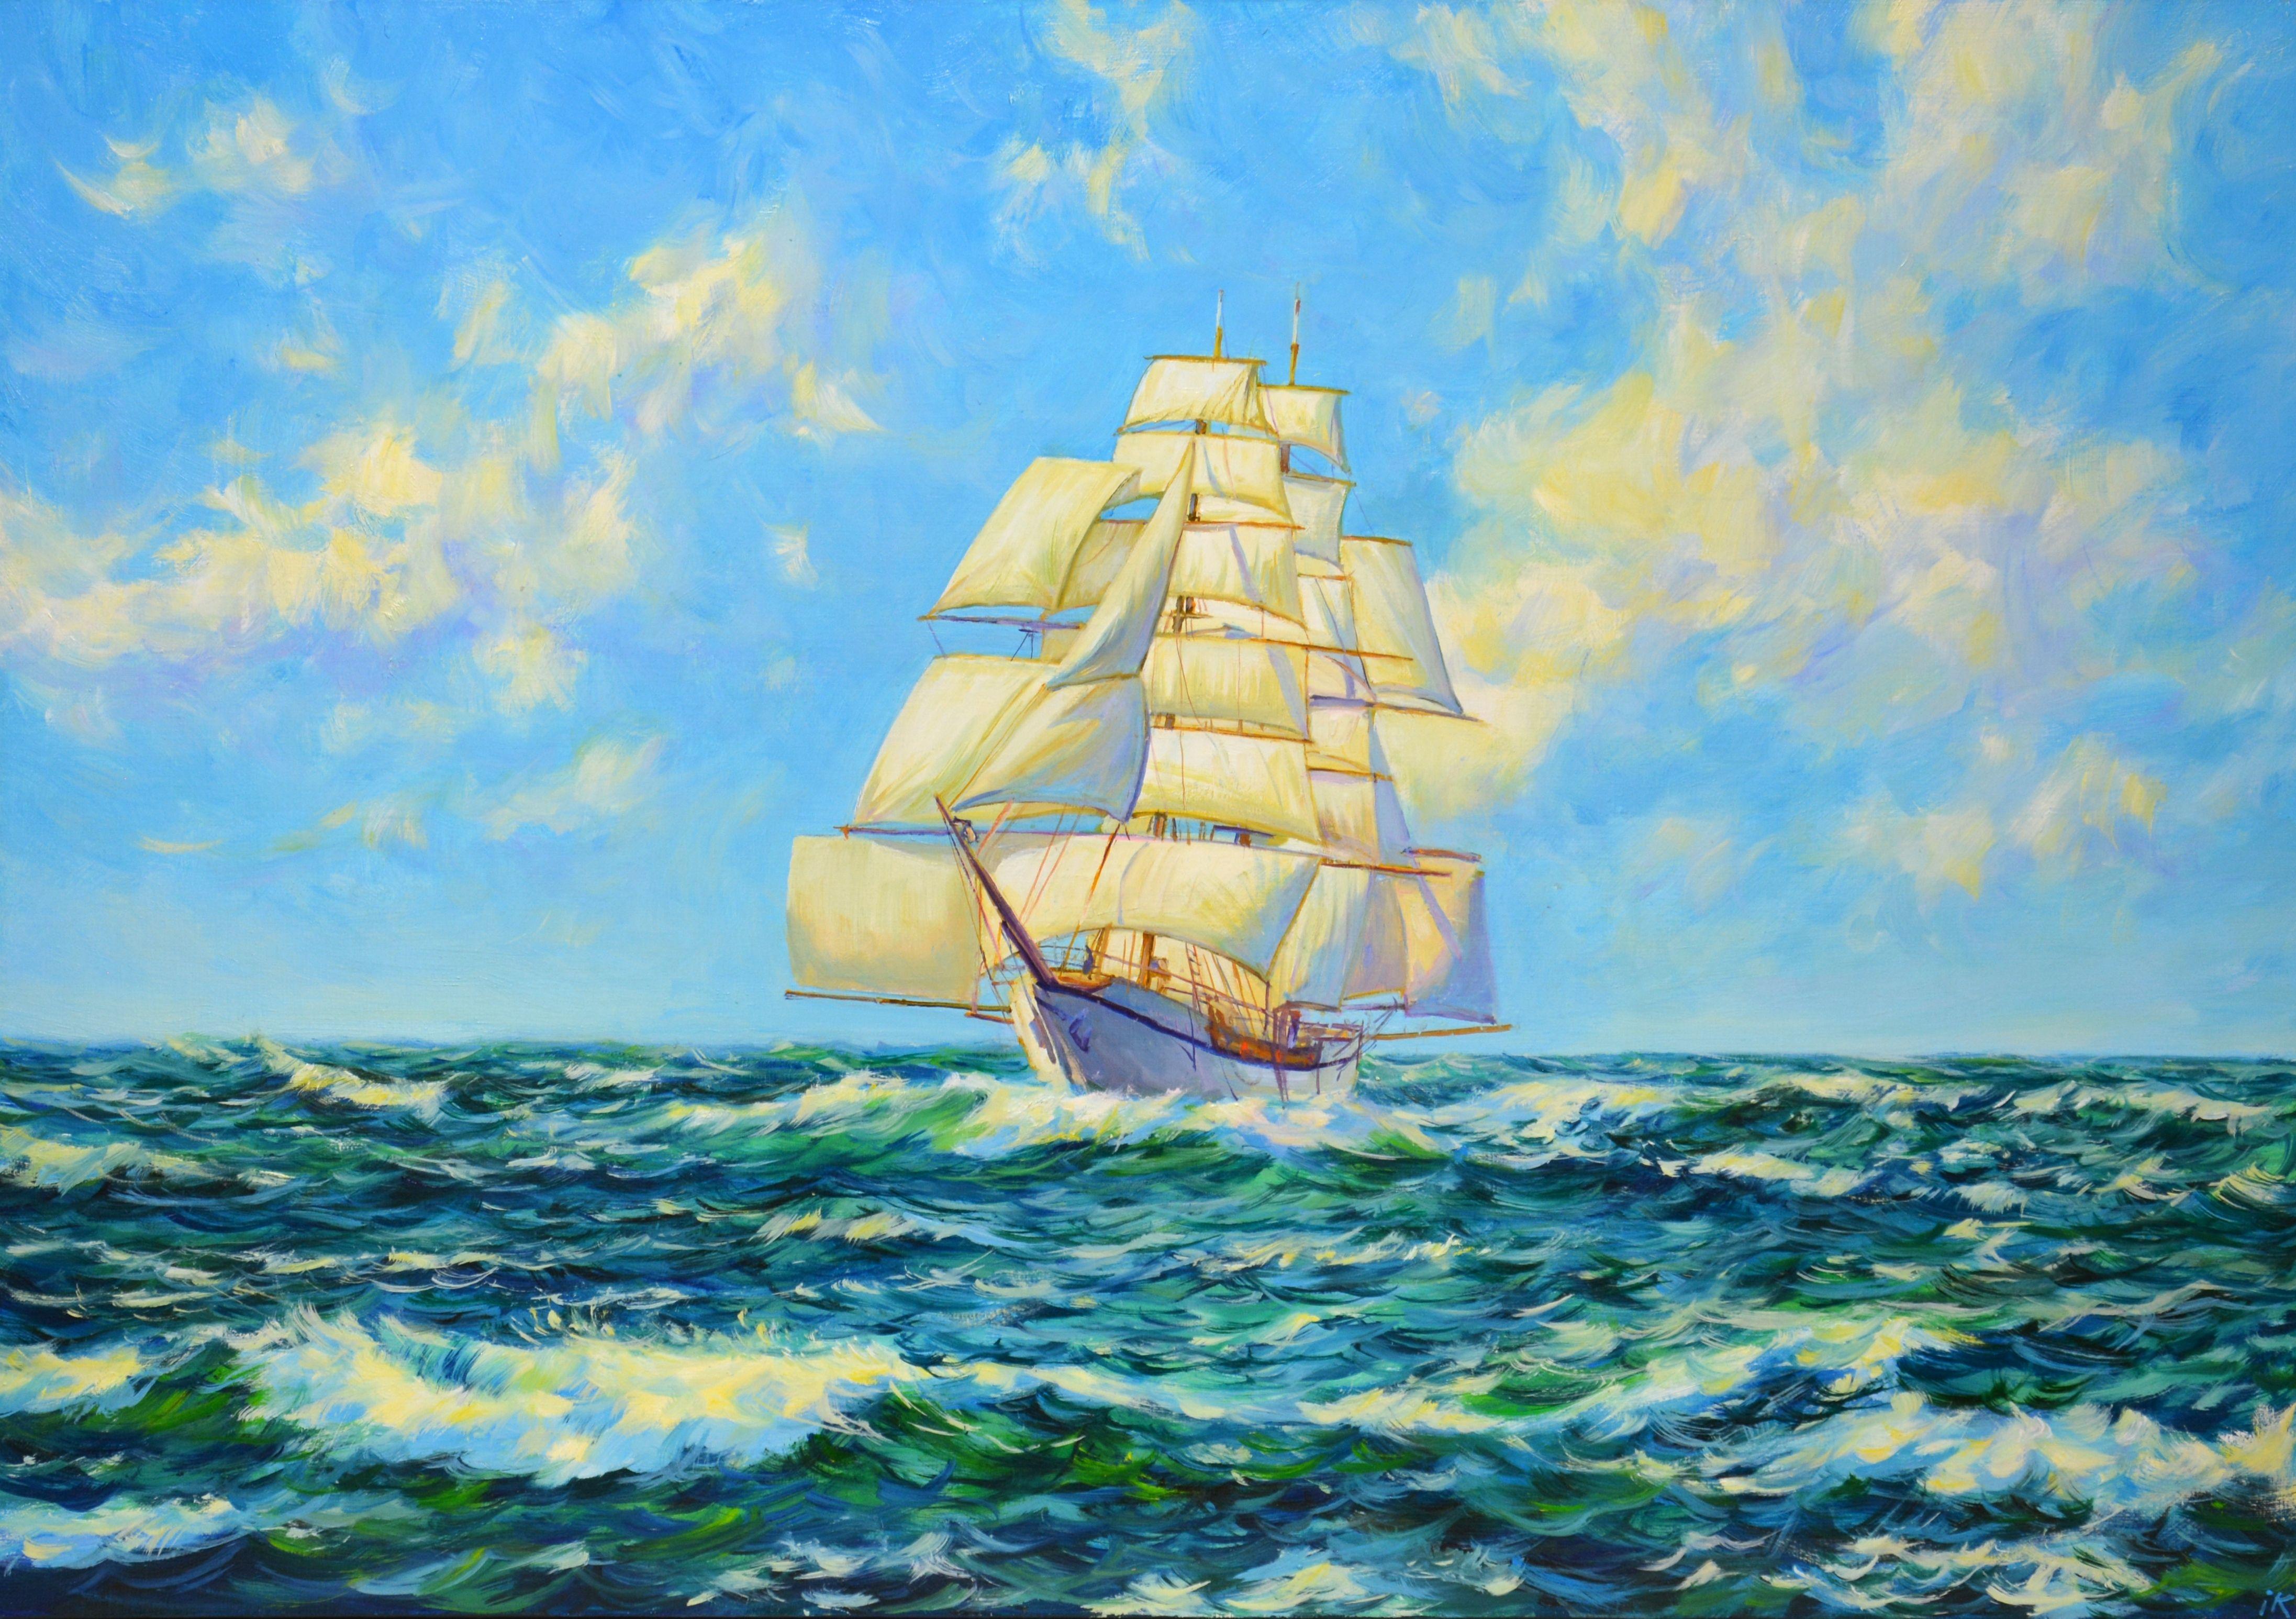 A sailboat runs under the midday sun, golden light is reflected from the canvas of the sail and passing clouds, waves, sea elements. Part of a continuous series of seascapes that reflect the luminous qualities of the ocean and the stunning sky above